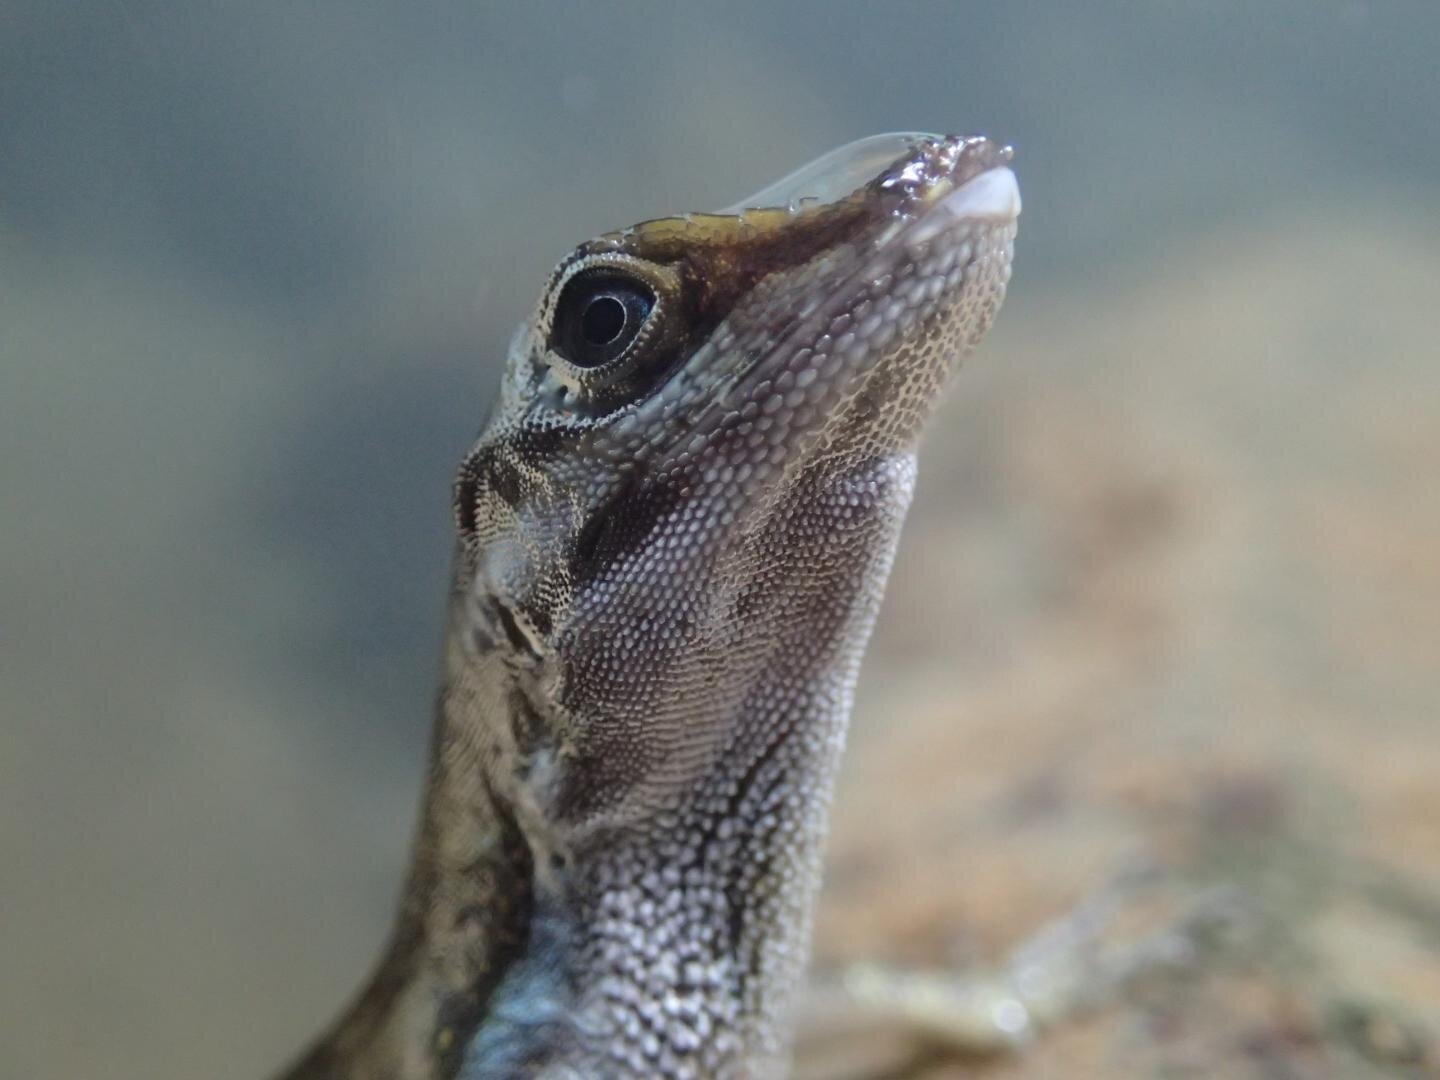 These lizards can breathe underwater thanks to air bubbles trapped on their skin